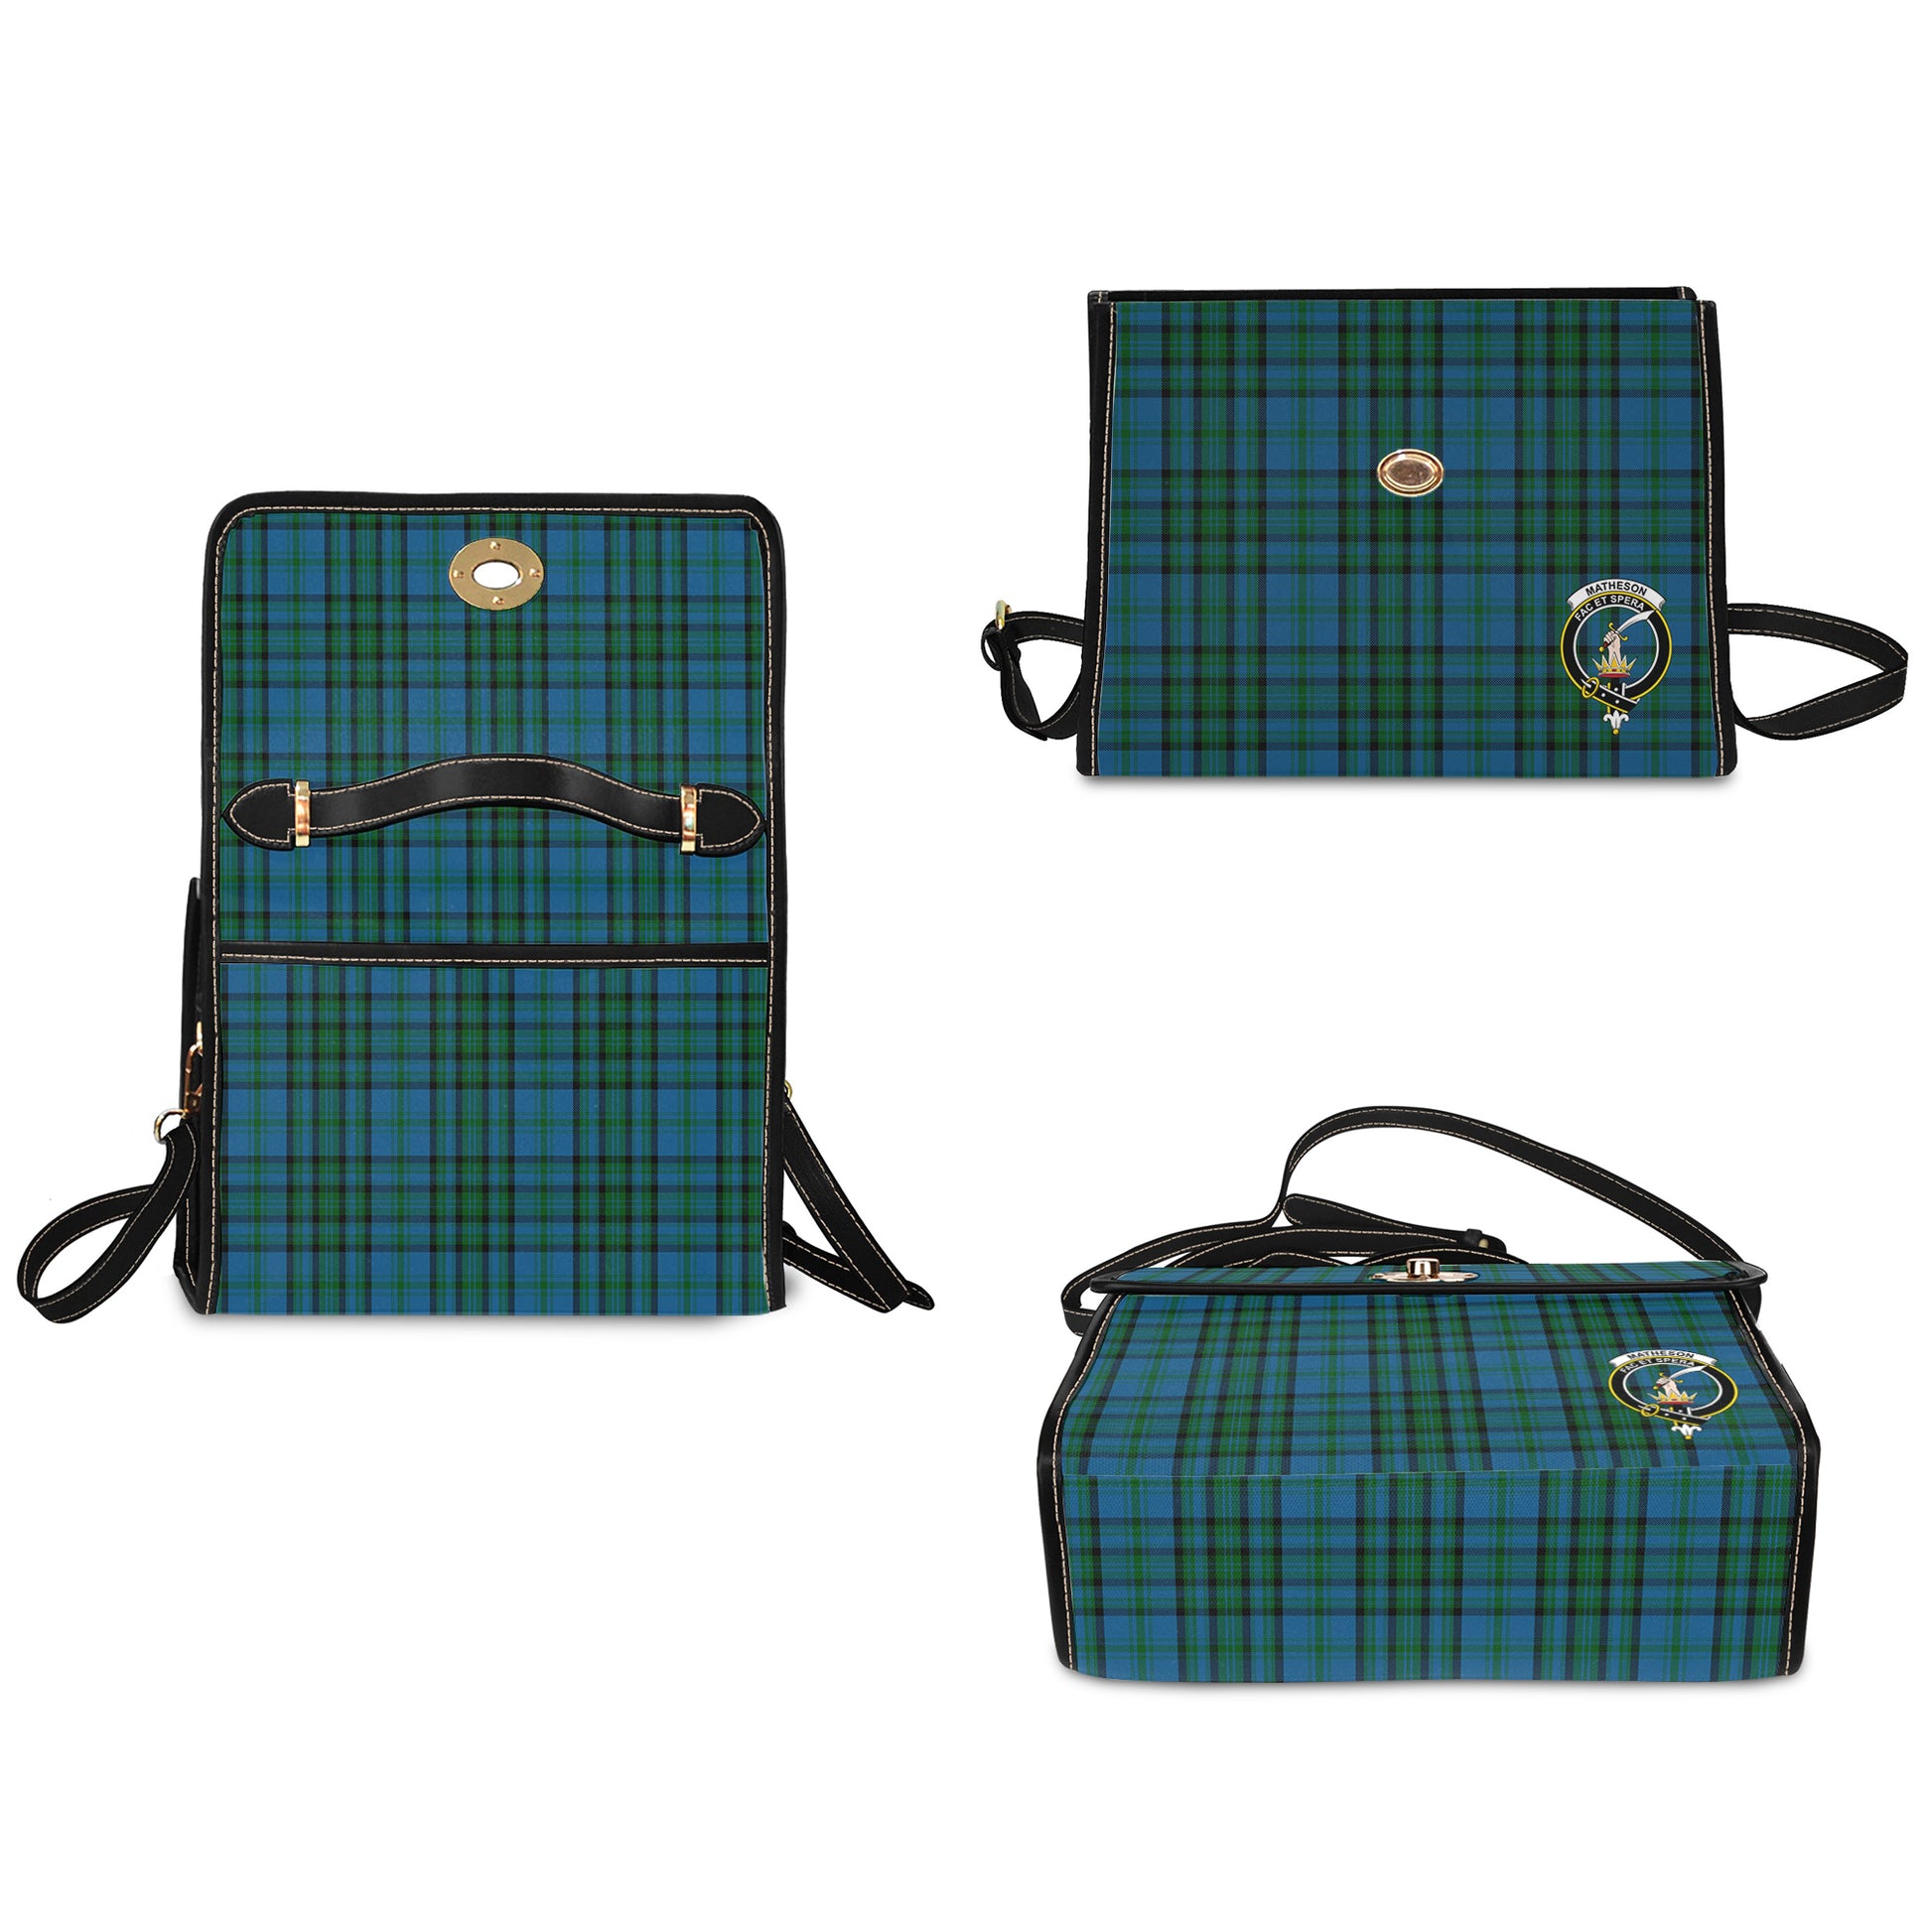 matheson-hunting-tartan-leather-strap-waterproof-canvas-bag-with-family-crest